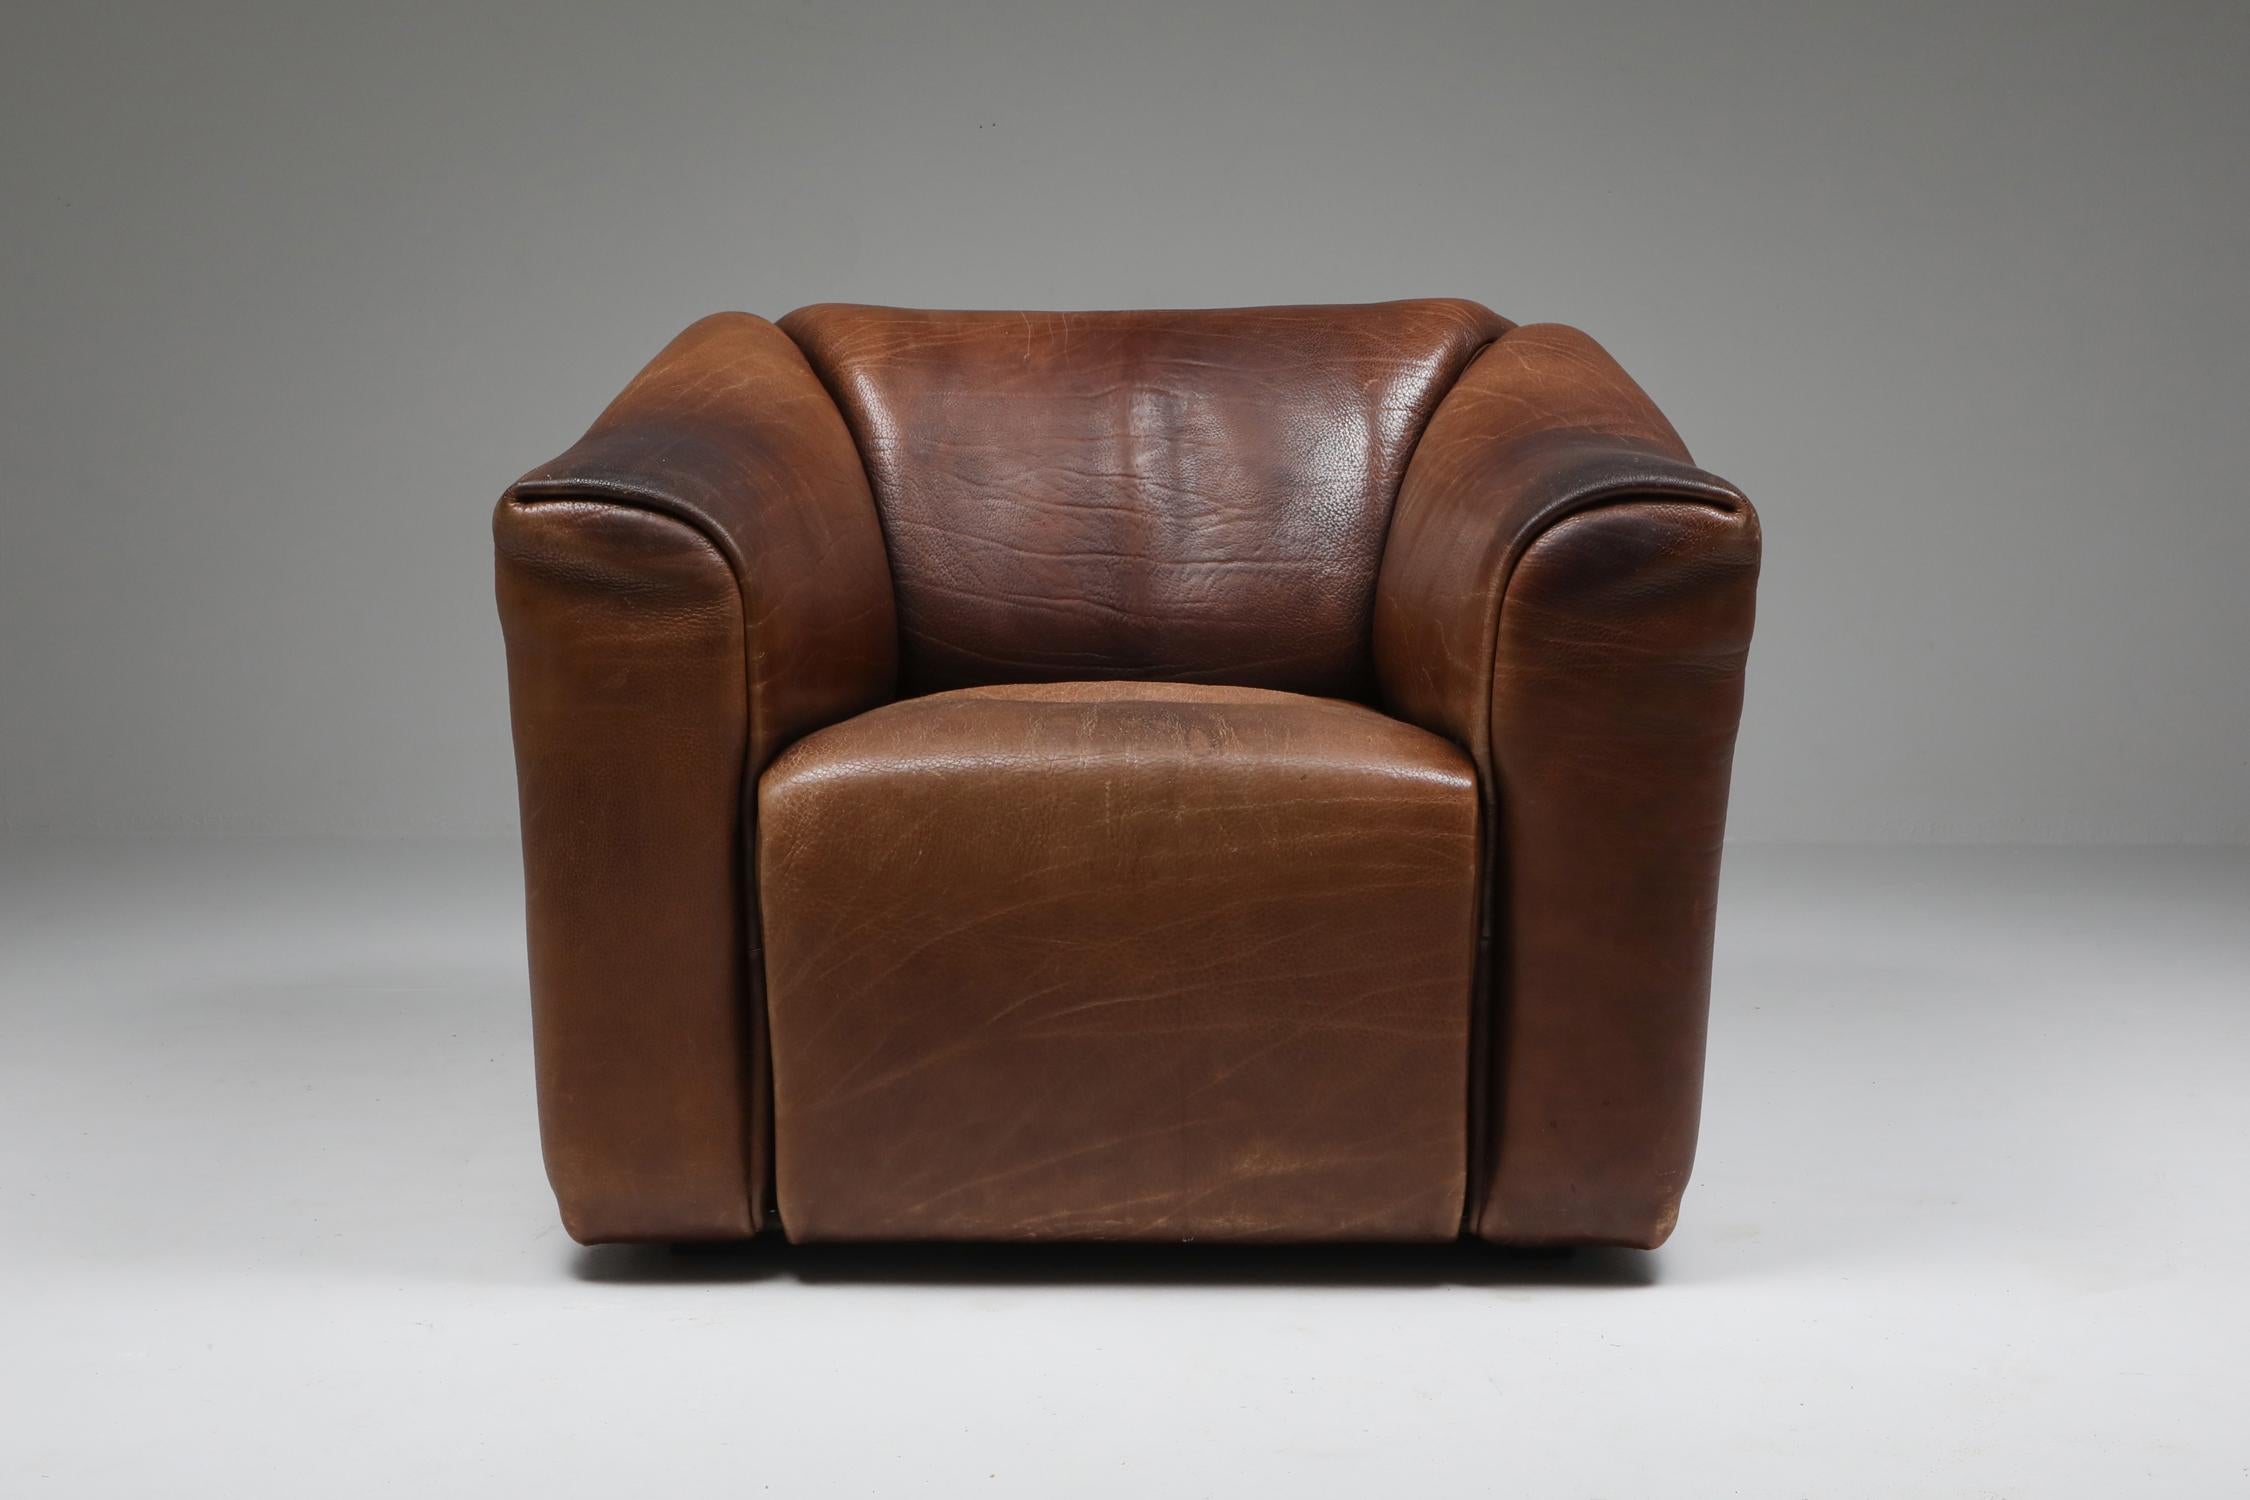 Brown leather armchair by Swiss manufacturer De Sede. Bull hide leather with retractable seating for an even more comfortable seat. The DS 47 model is a true design Classic and is still in production. This is an original model with tons of character